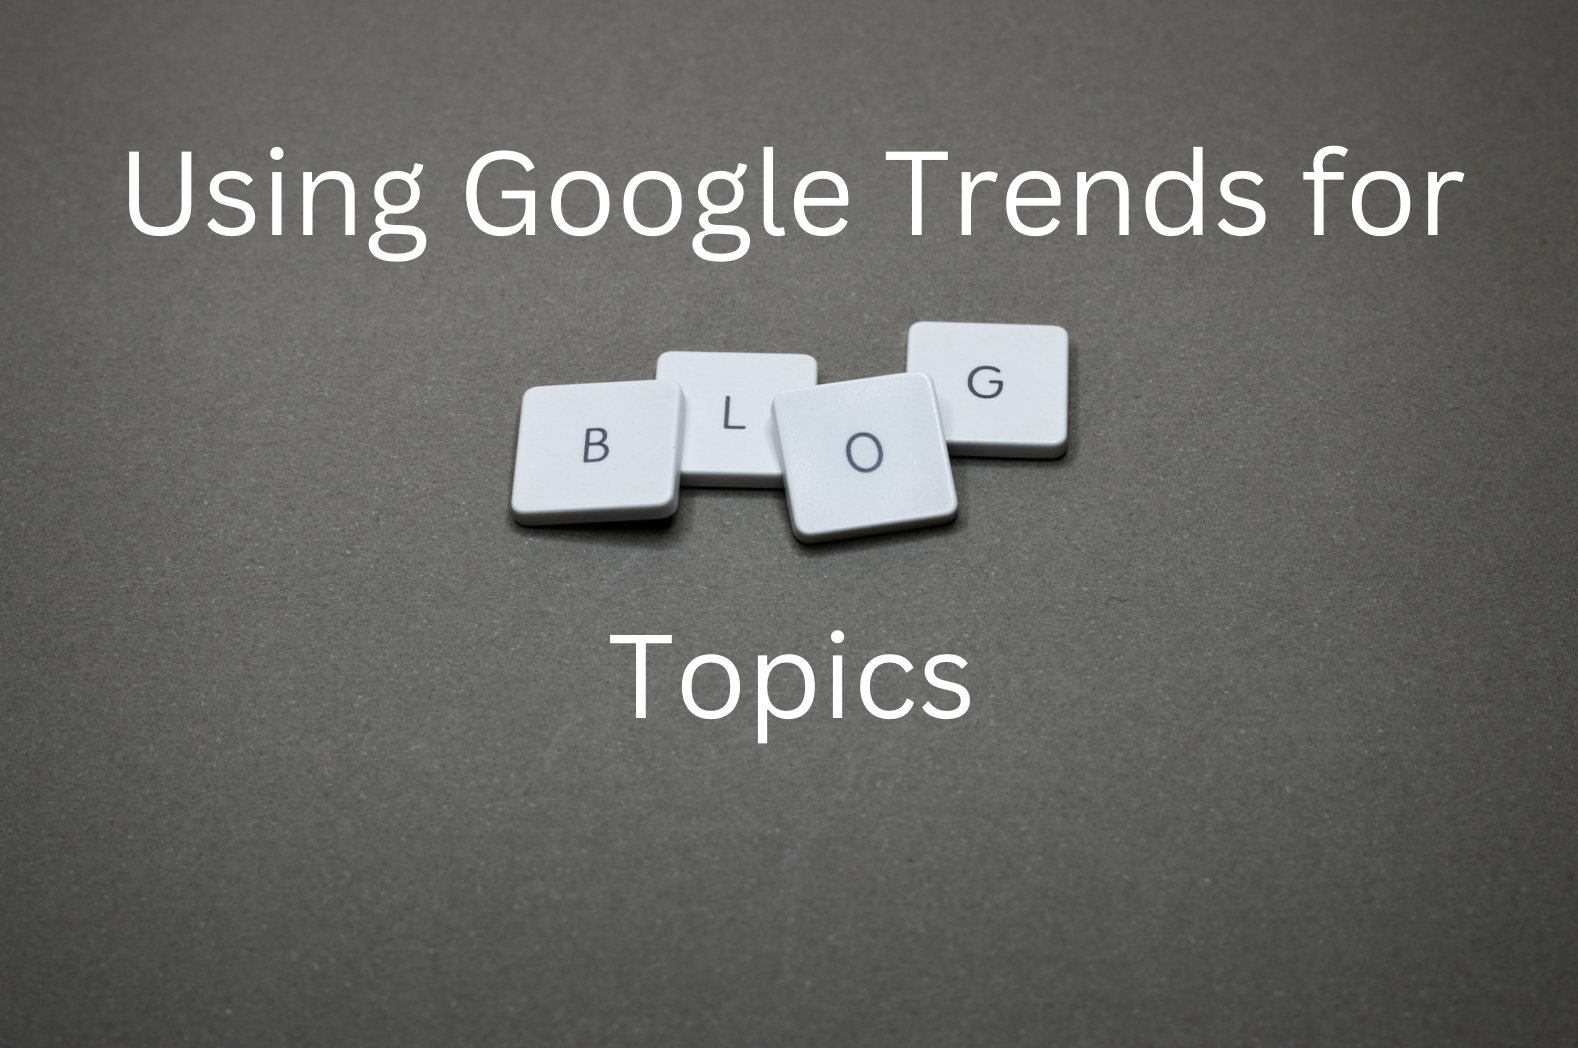 Photo by Miguel Á. Padriñán: Using Google Trends for Blog Topics.